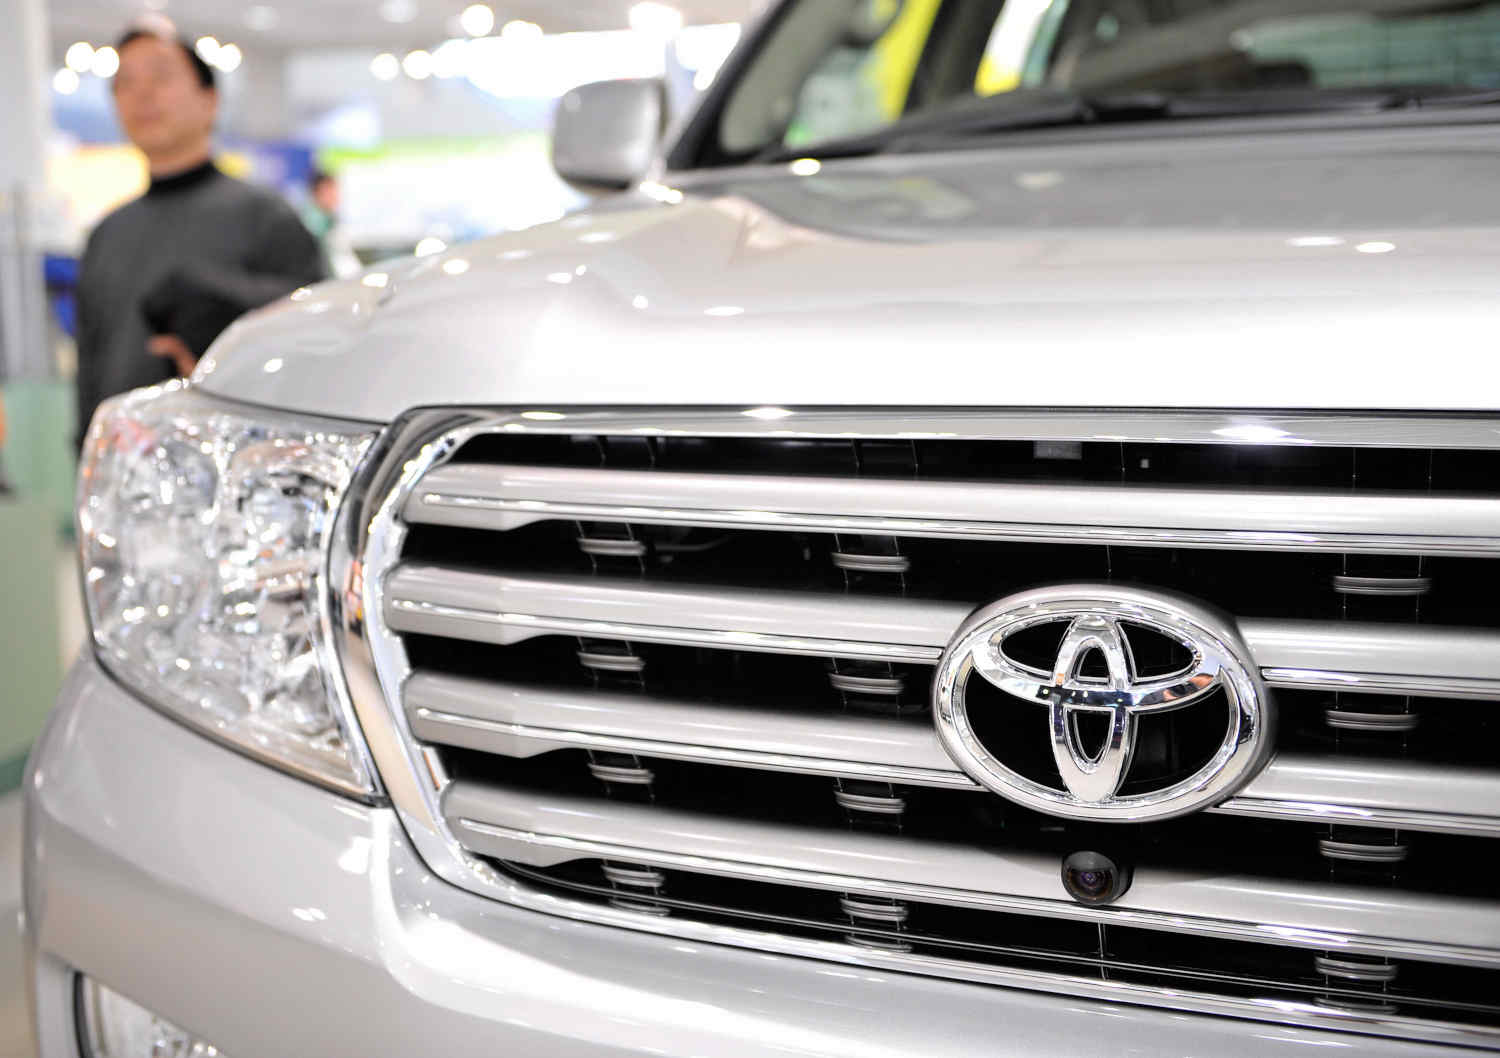 Toyota is one of the longest-lasting car brands, and the Land Cruiser topped the list